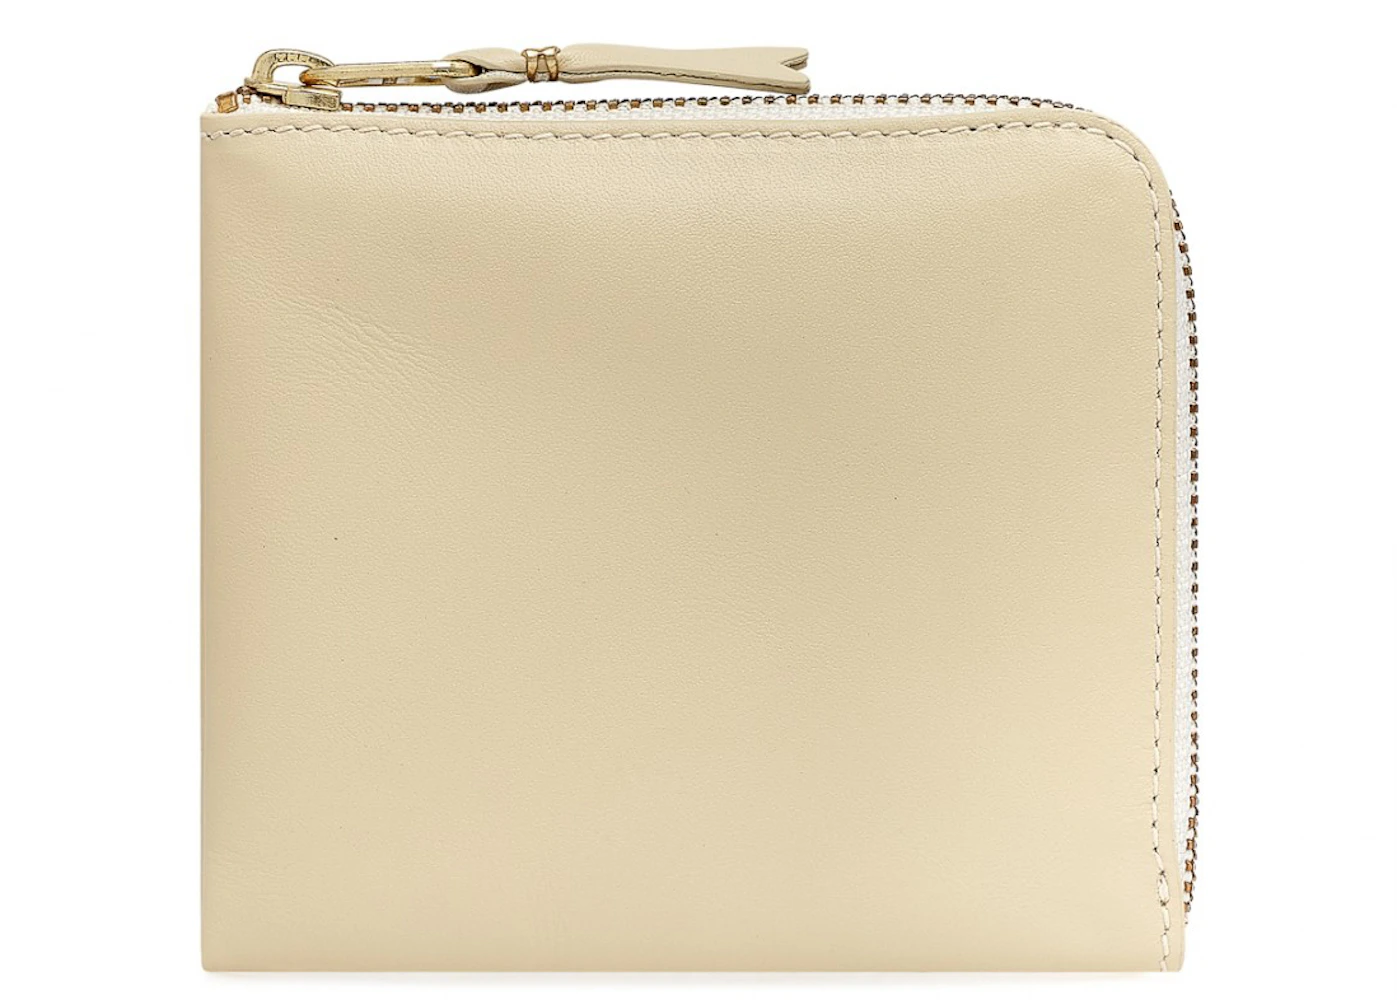 Comme des Garcons SA3100 Classic Plain Wallet Off-White in Leather with ...